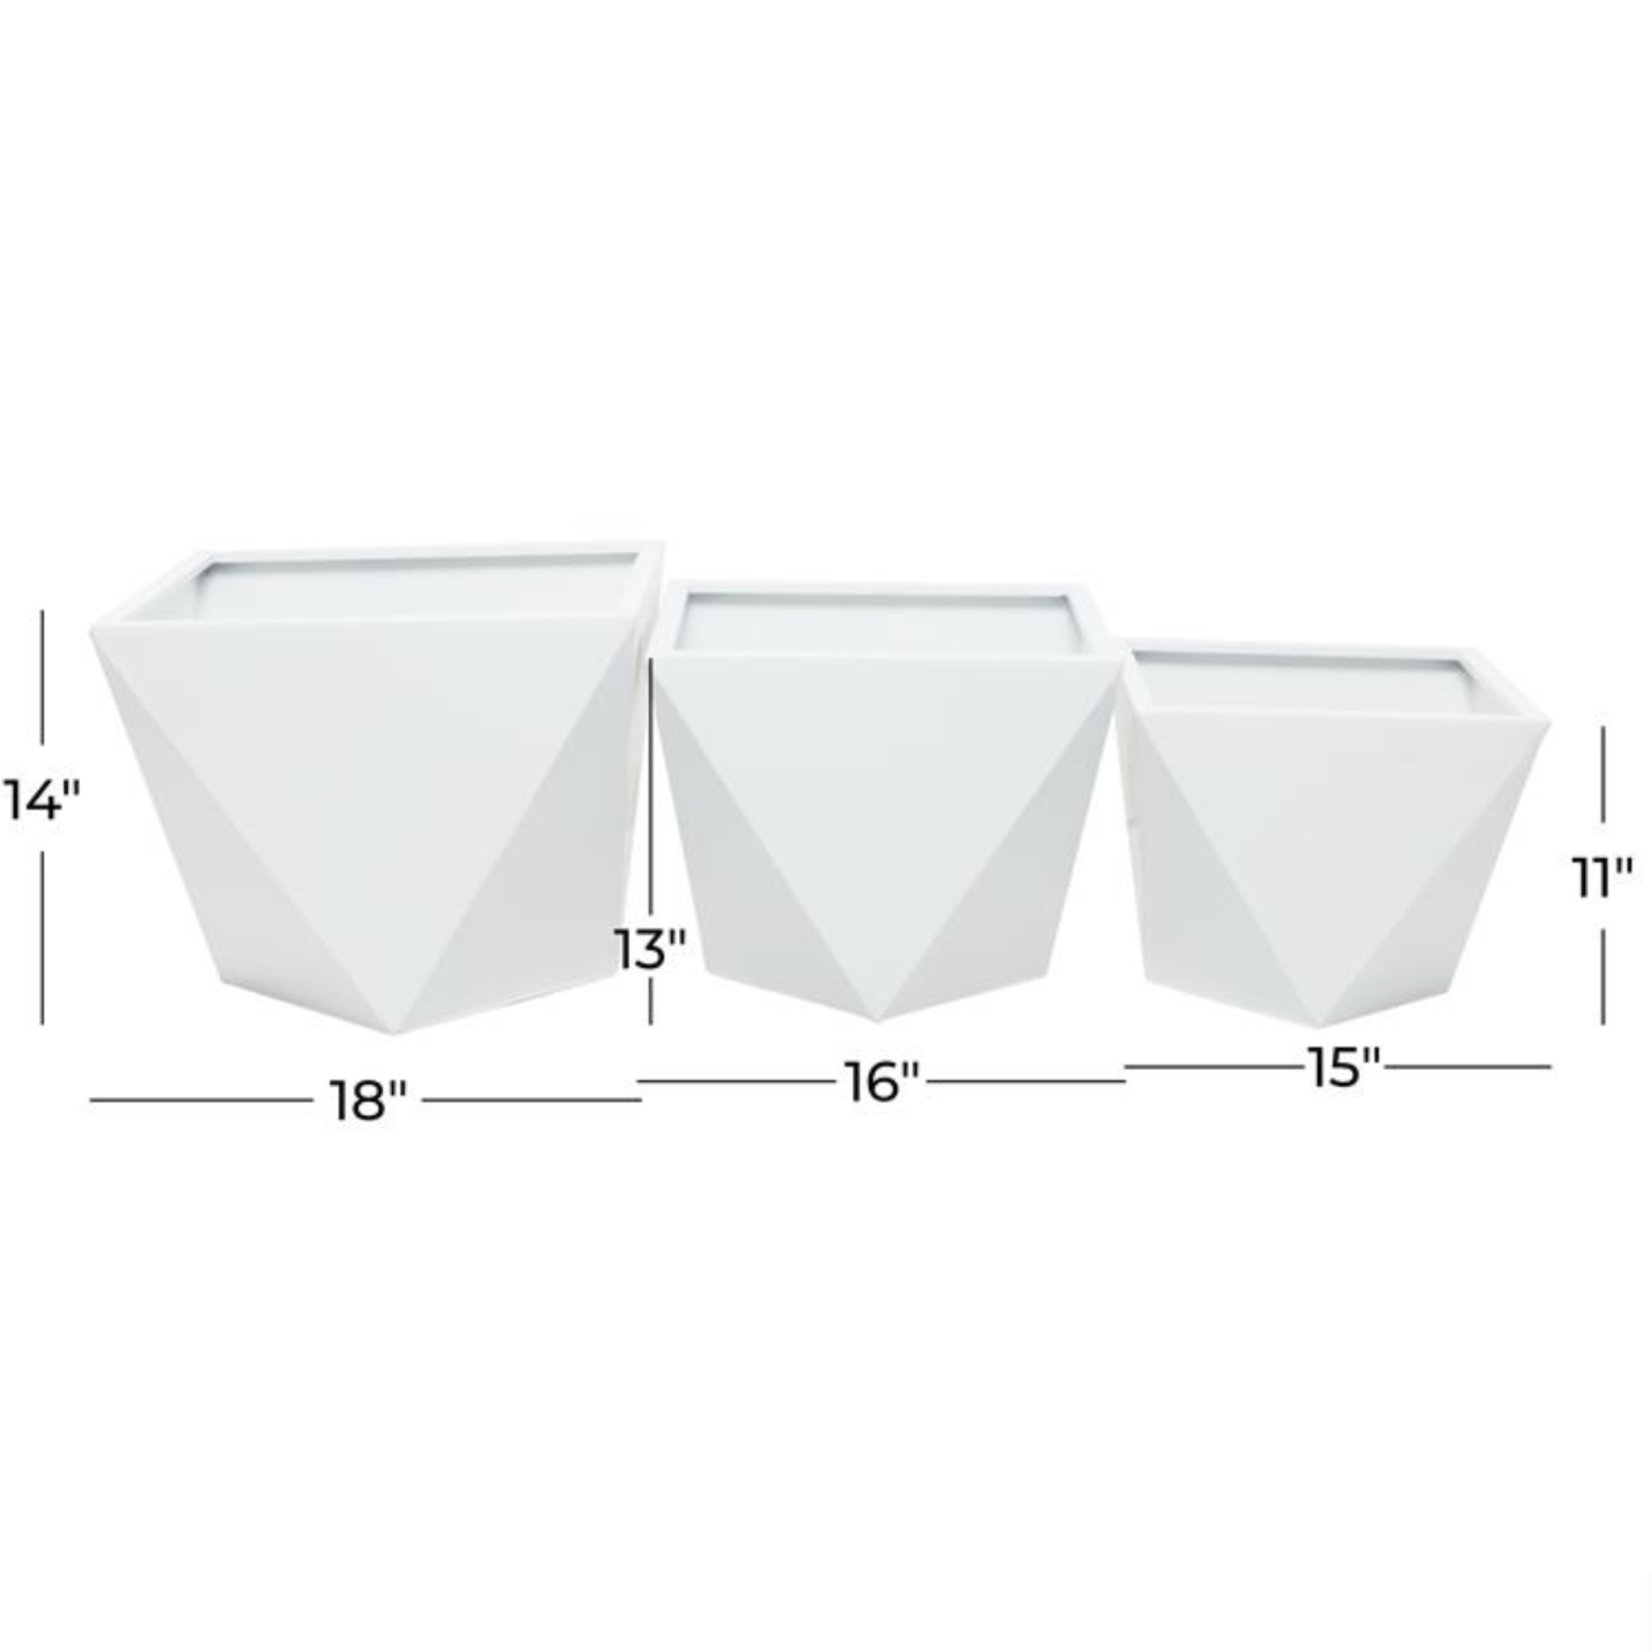 14.5”h x 18.5” LARGE WHITE METAL GEOMETRICAL INDOOR OUTDOOR PLANTER (NOT WATER TIGHT)